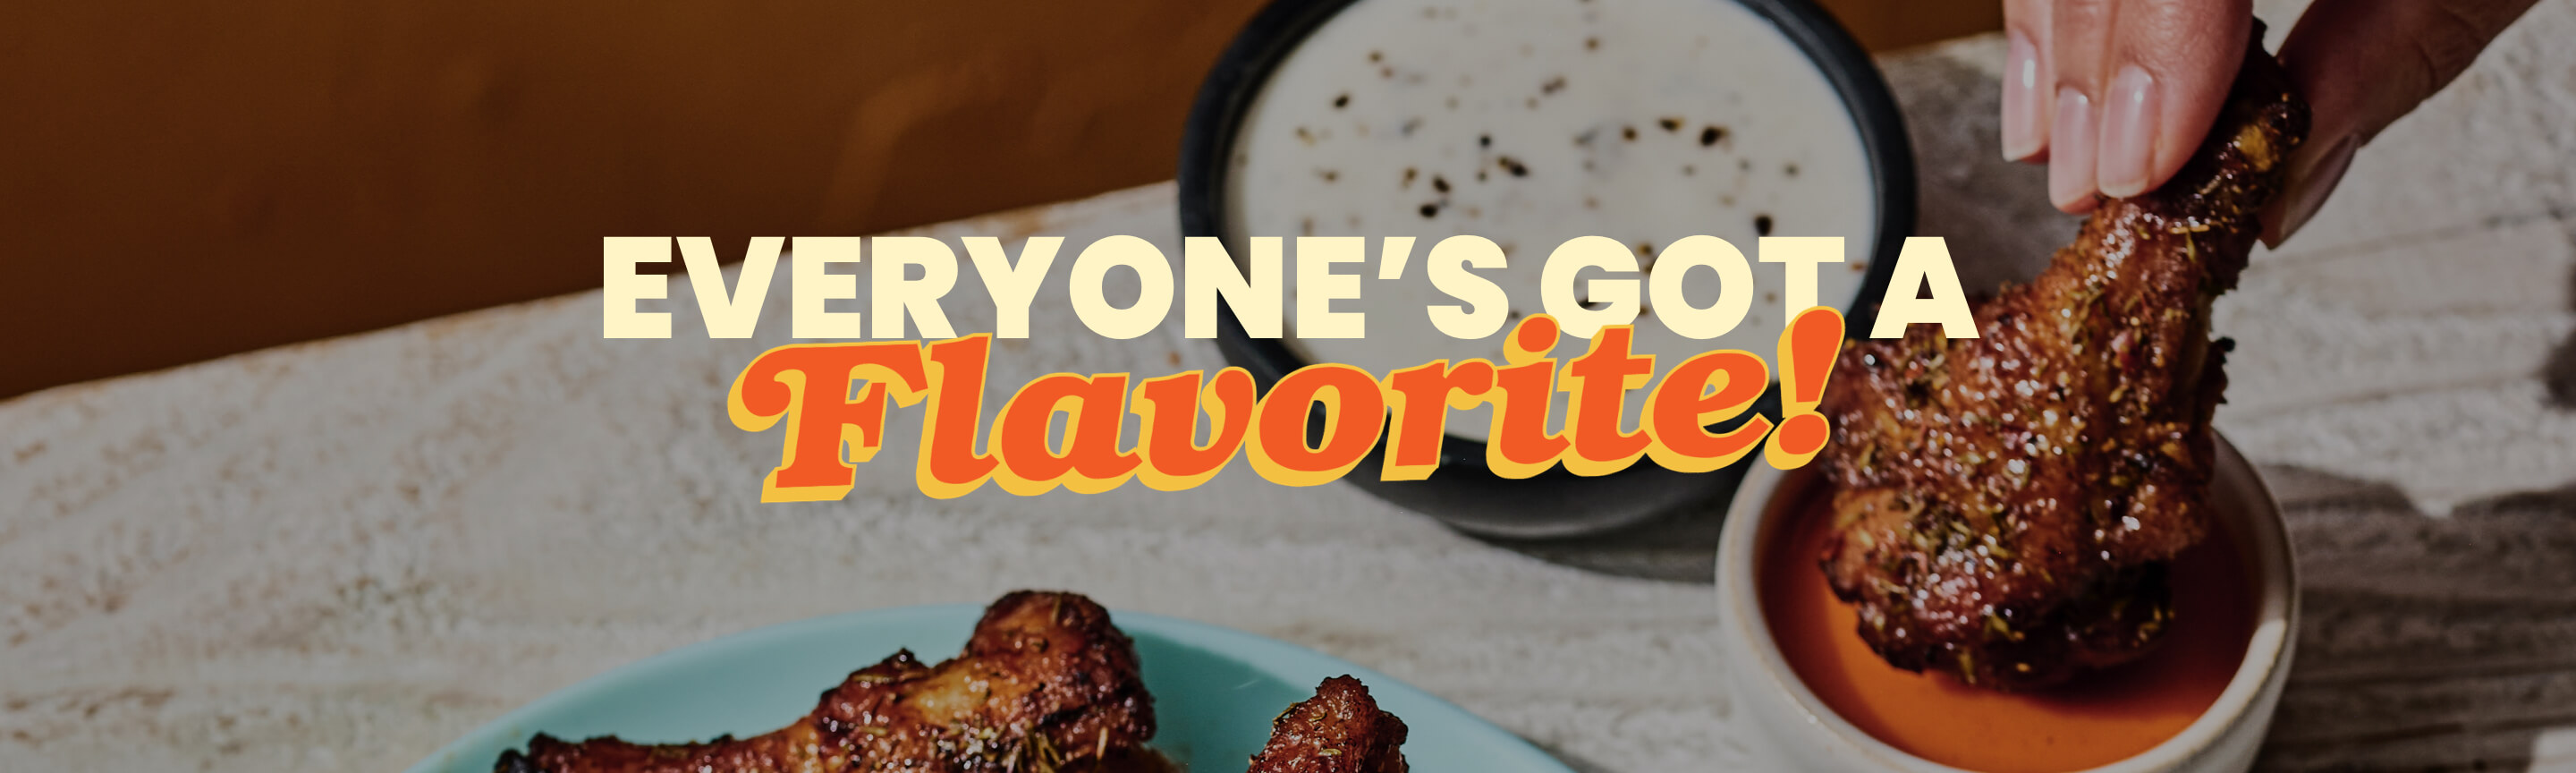 Sauces and Rubs - Everyone's got a favorite!